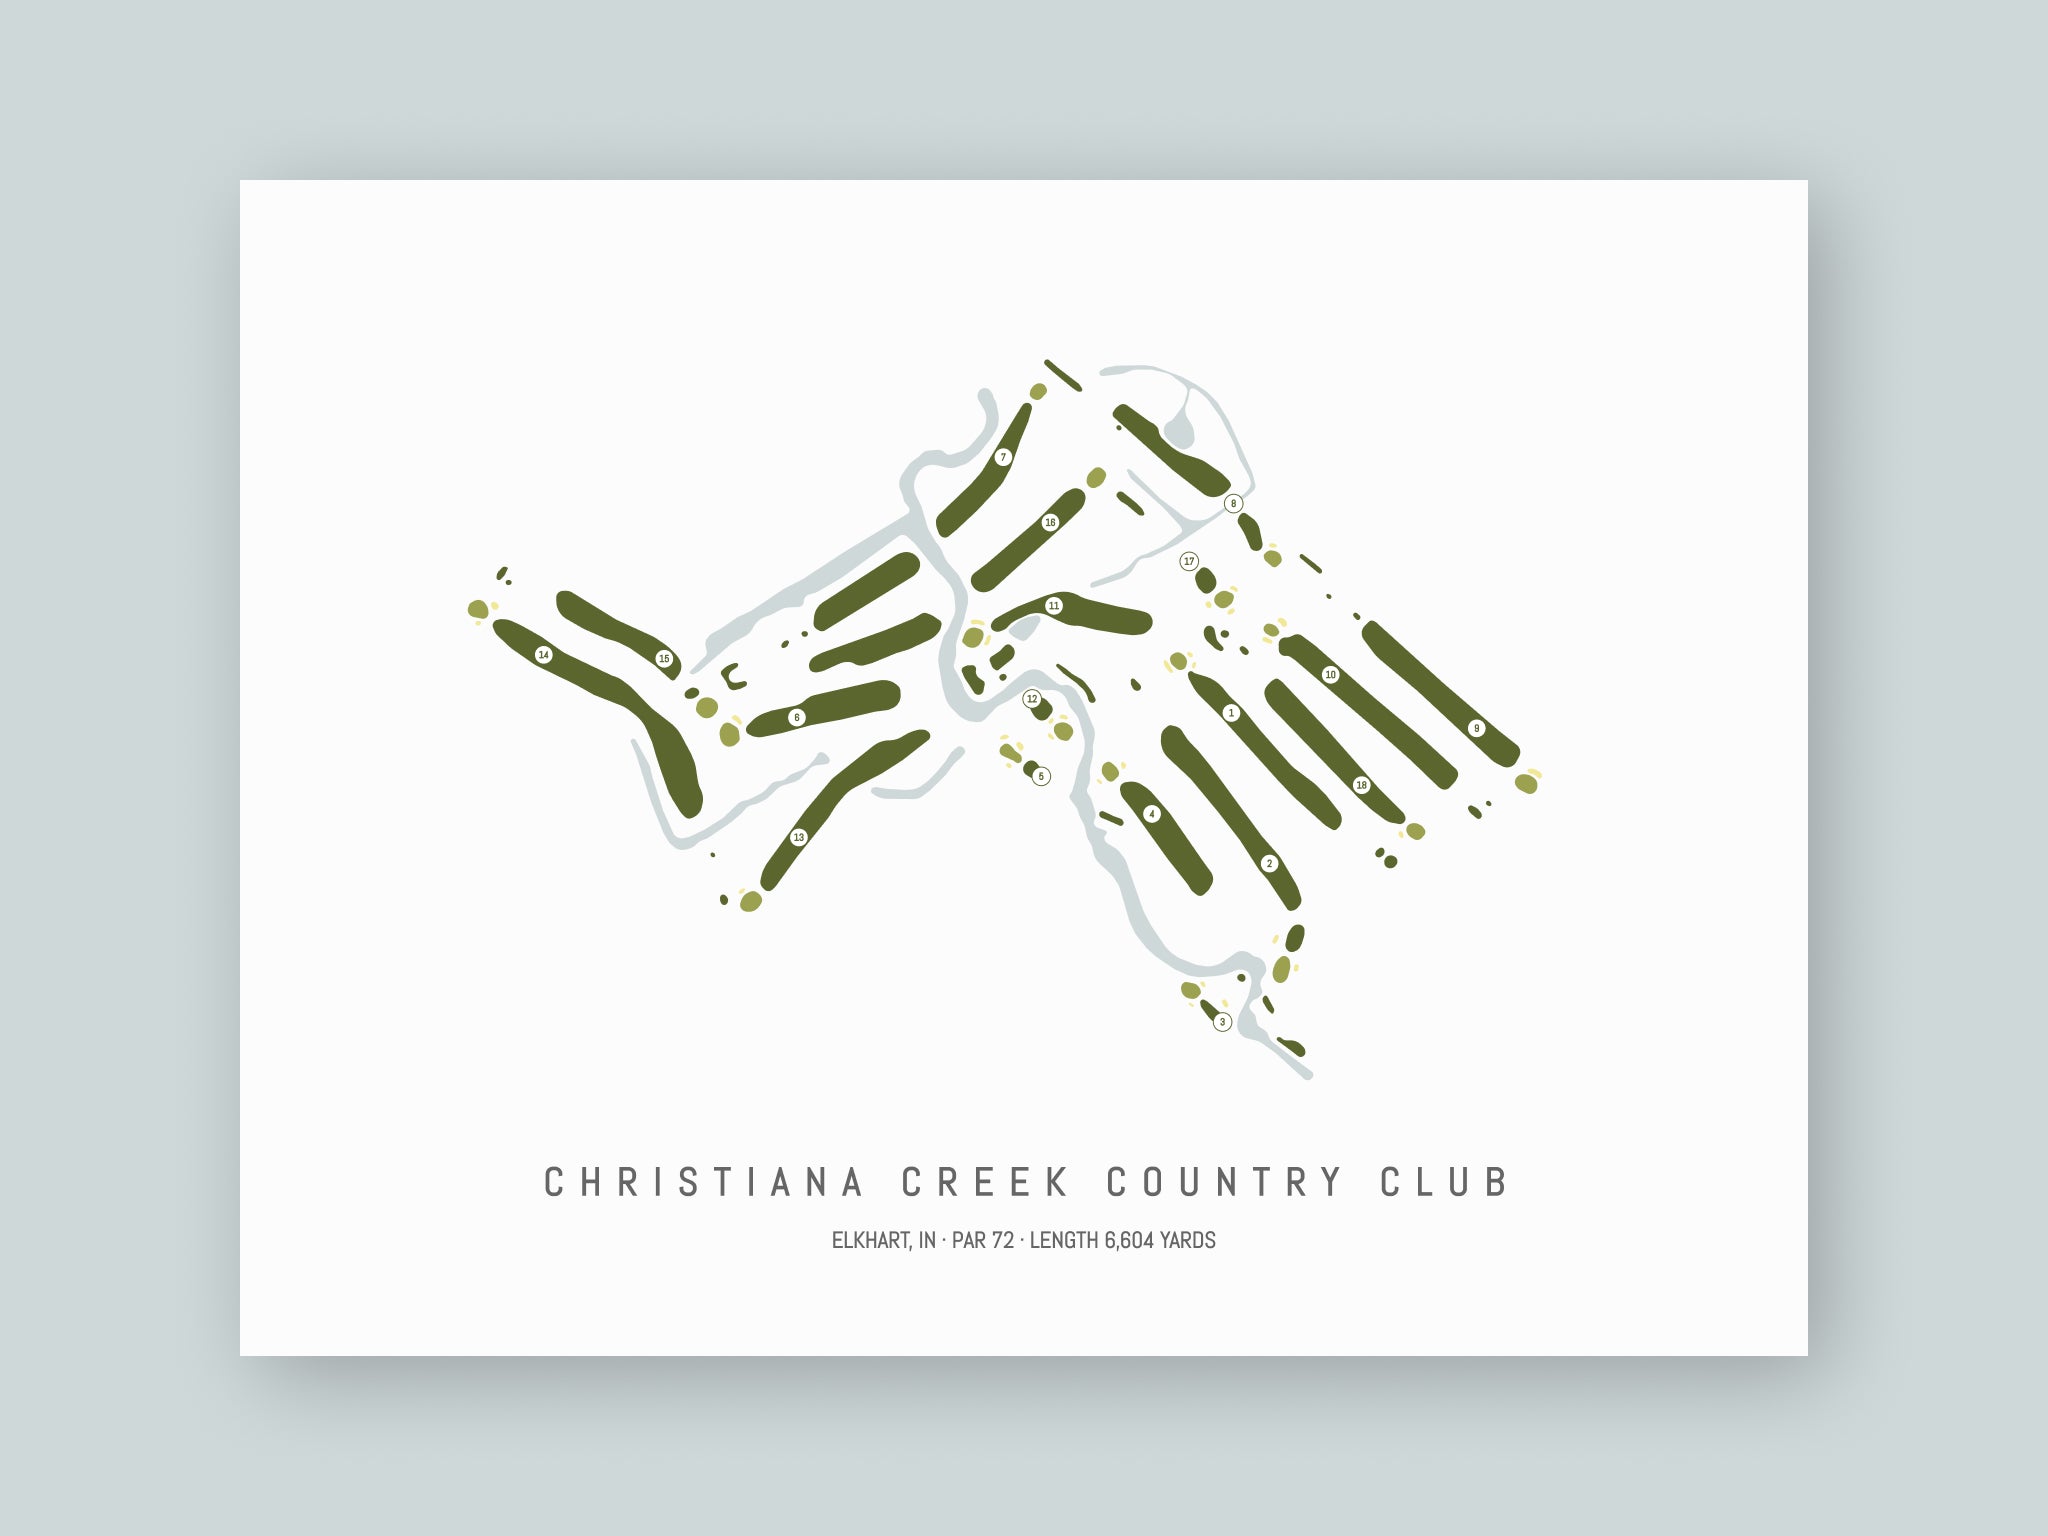 Christiana-Creek-Country-Club-IN--Unframed-24x18-With-Hole-Numbers